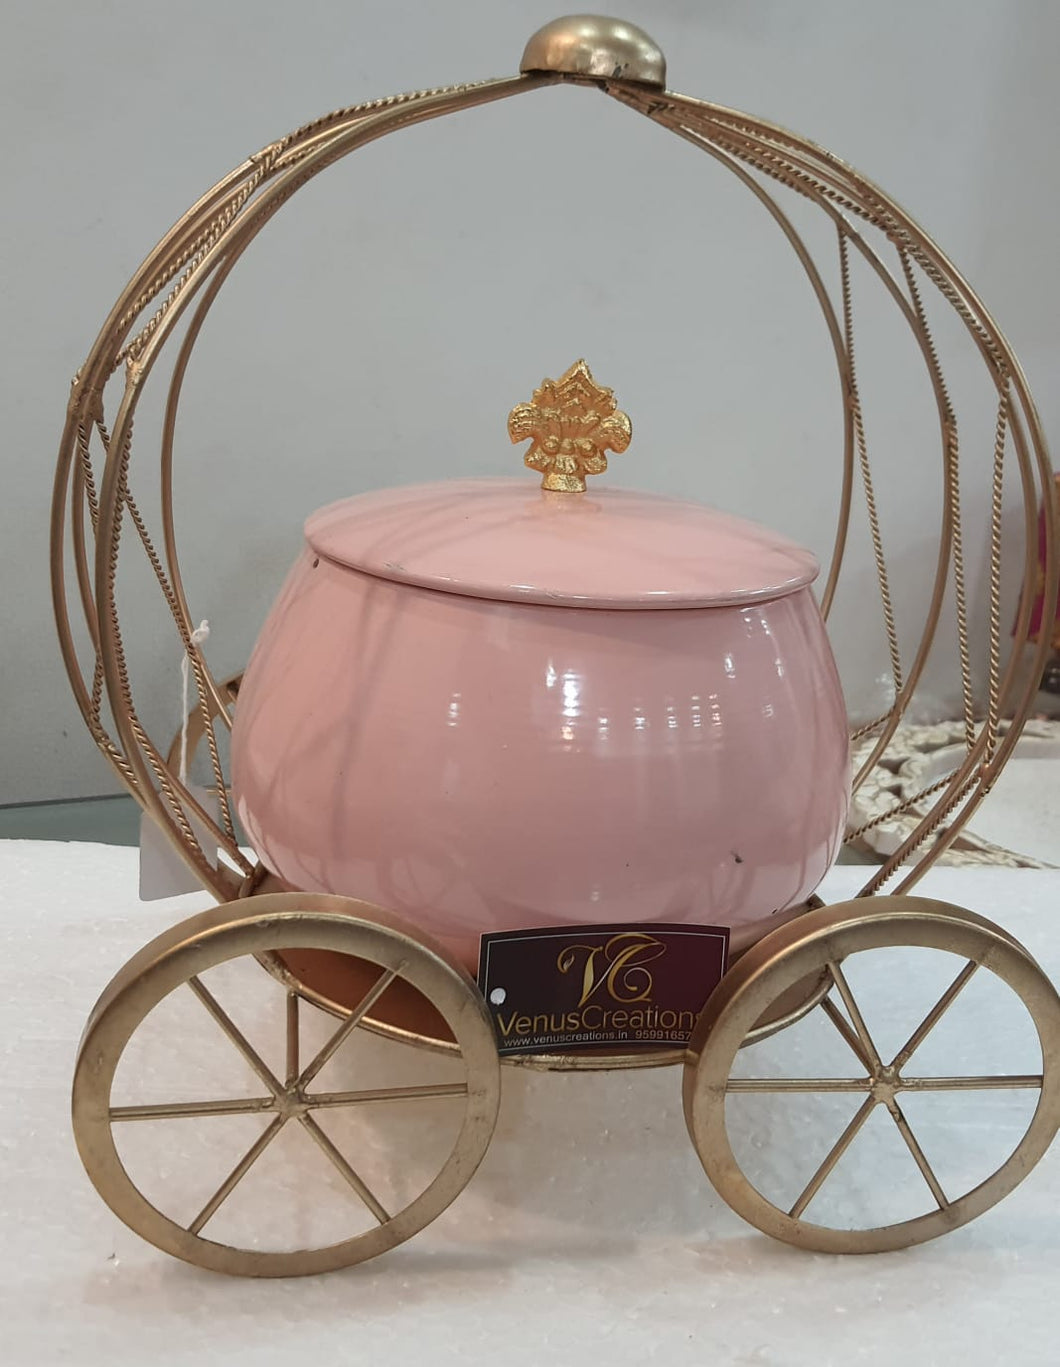 Metal basket with wheels and Pink metal jar for dry fruit / sweets etc